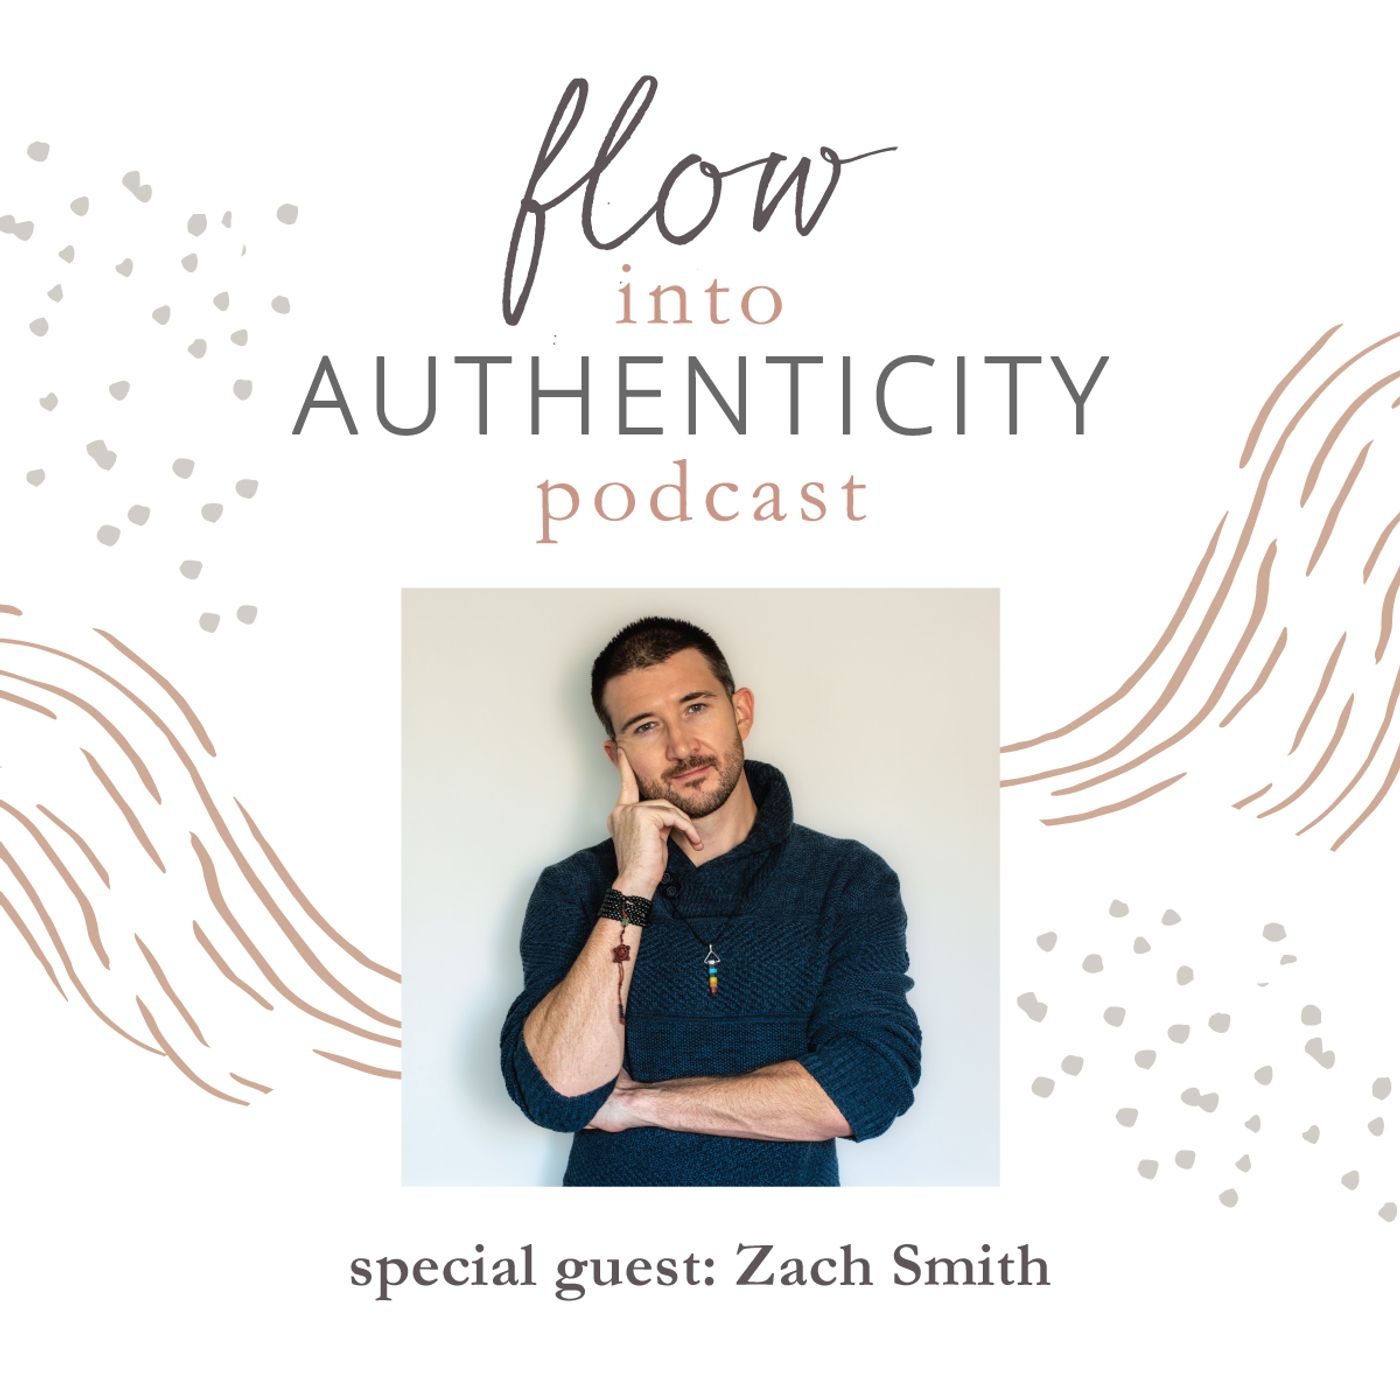 How to make everything creative with lessons from Zen - an interview with Zach Smith